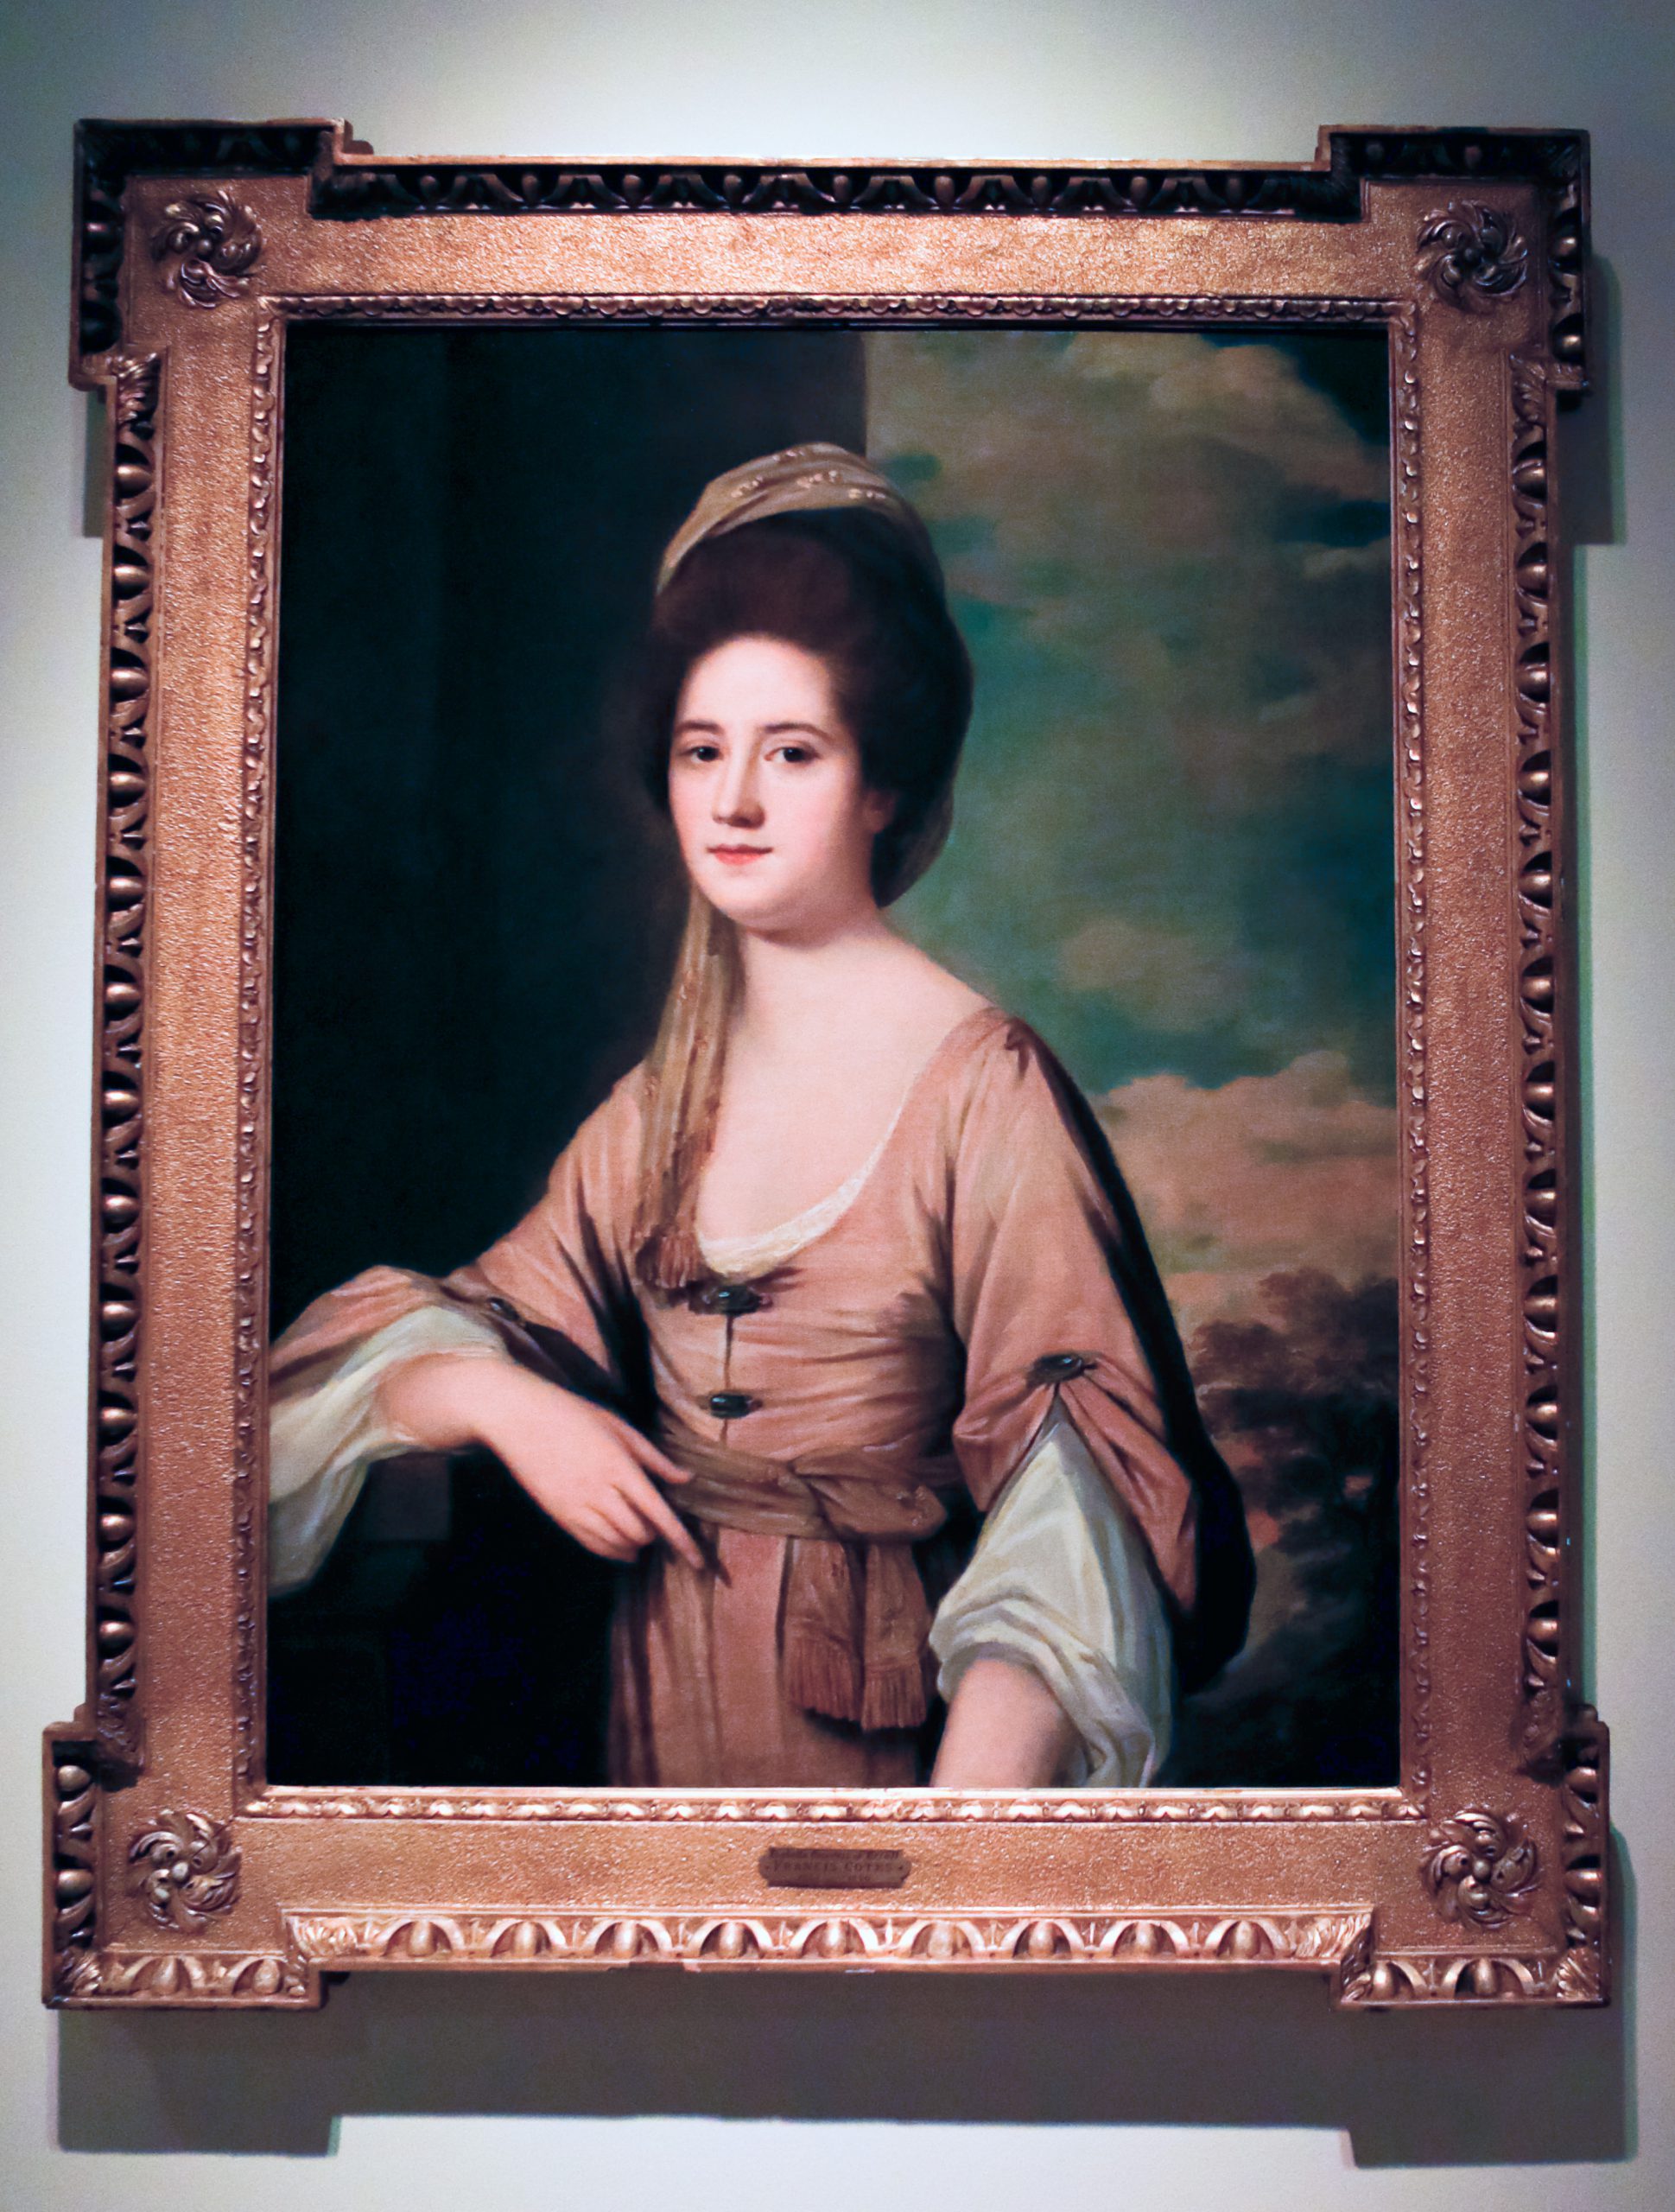 Oil painting of a woman of nobility in the 19th century. This image shows the painting as it would look under modern lighting.